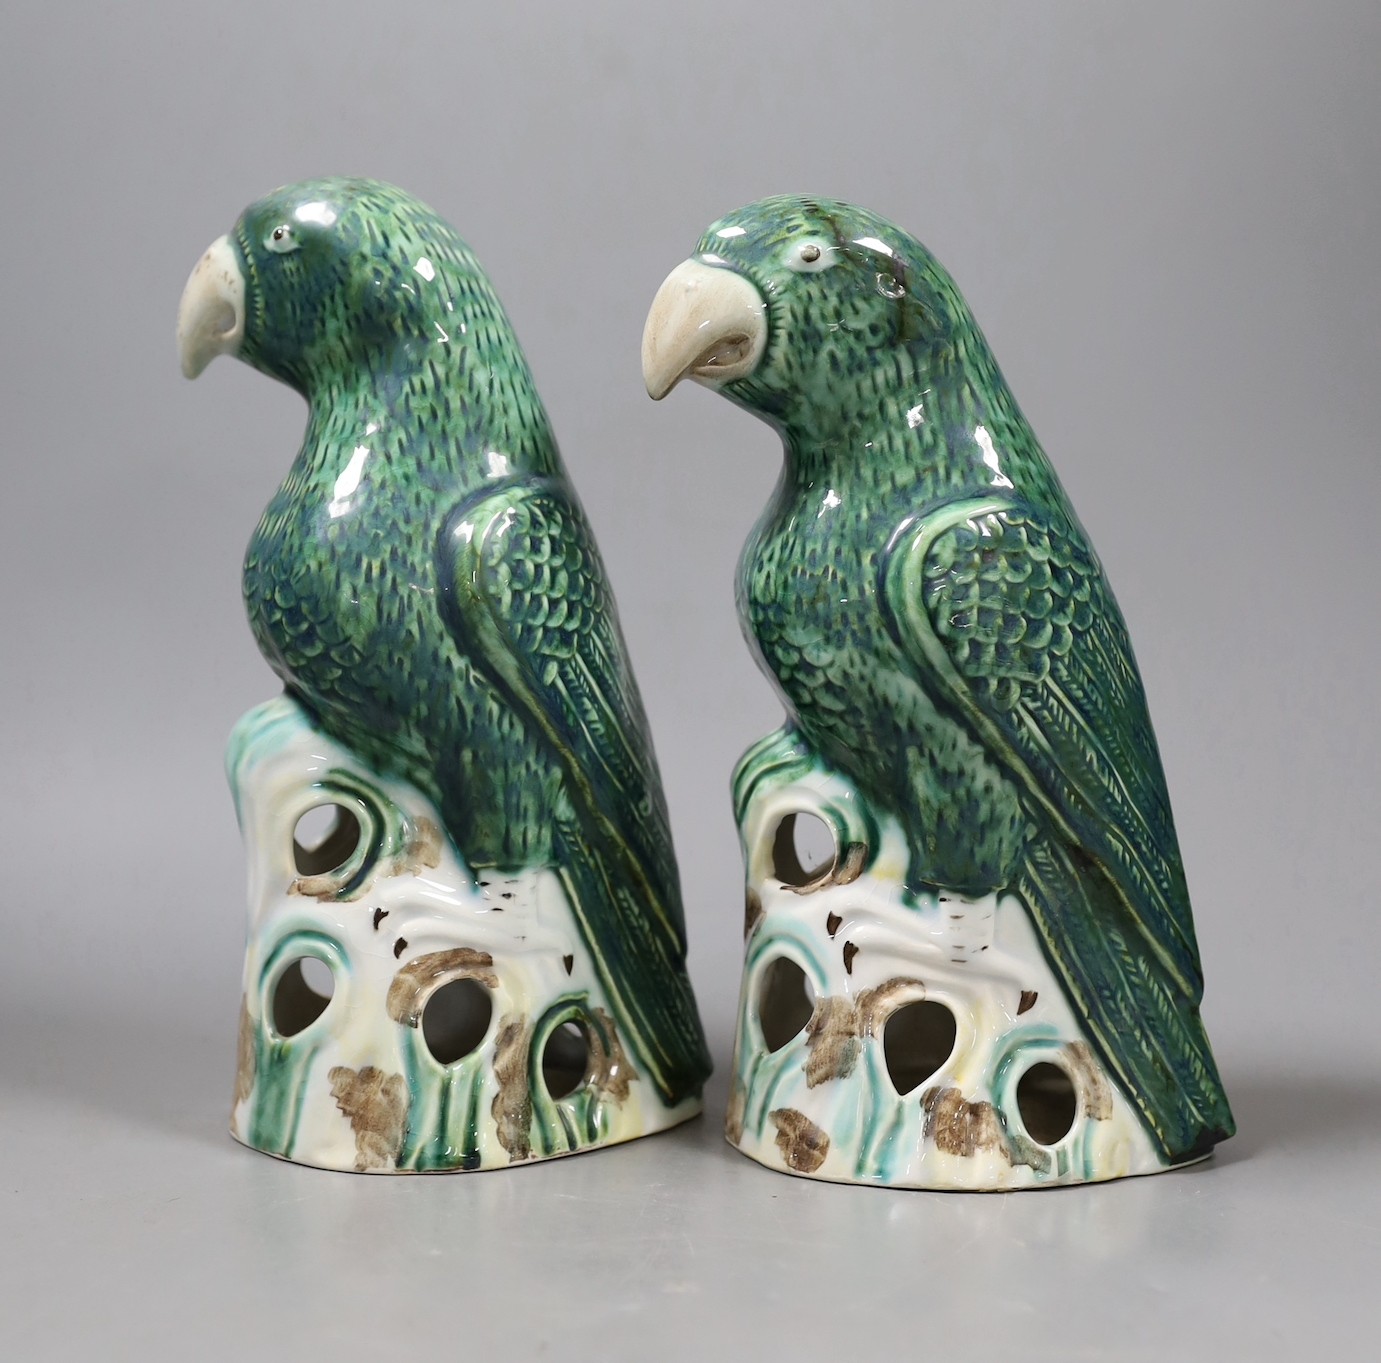 A pair of Asprey marked ceramic parrots on perches made for Recollections Ltd. by Gladstone Pottery Museum. 23cm high